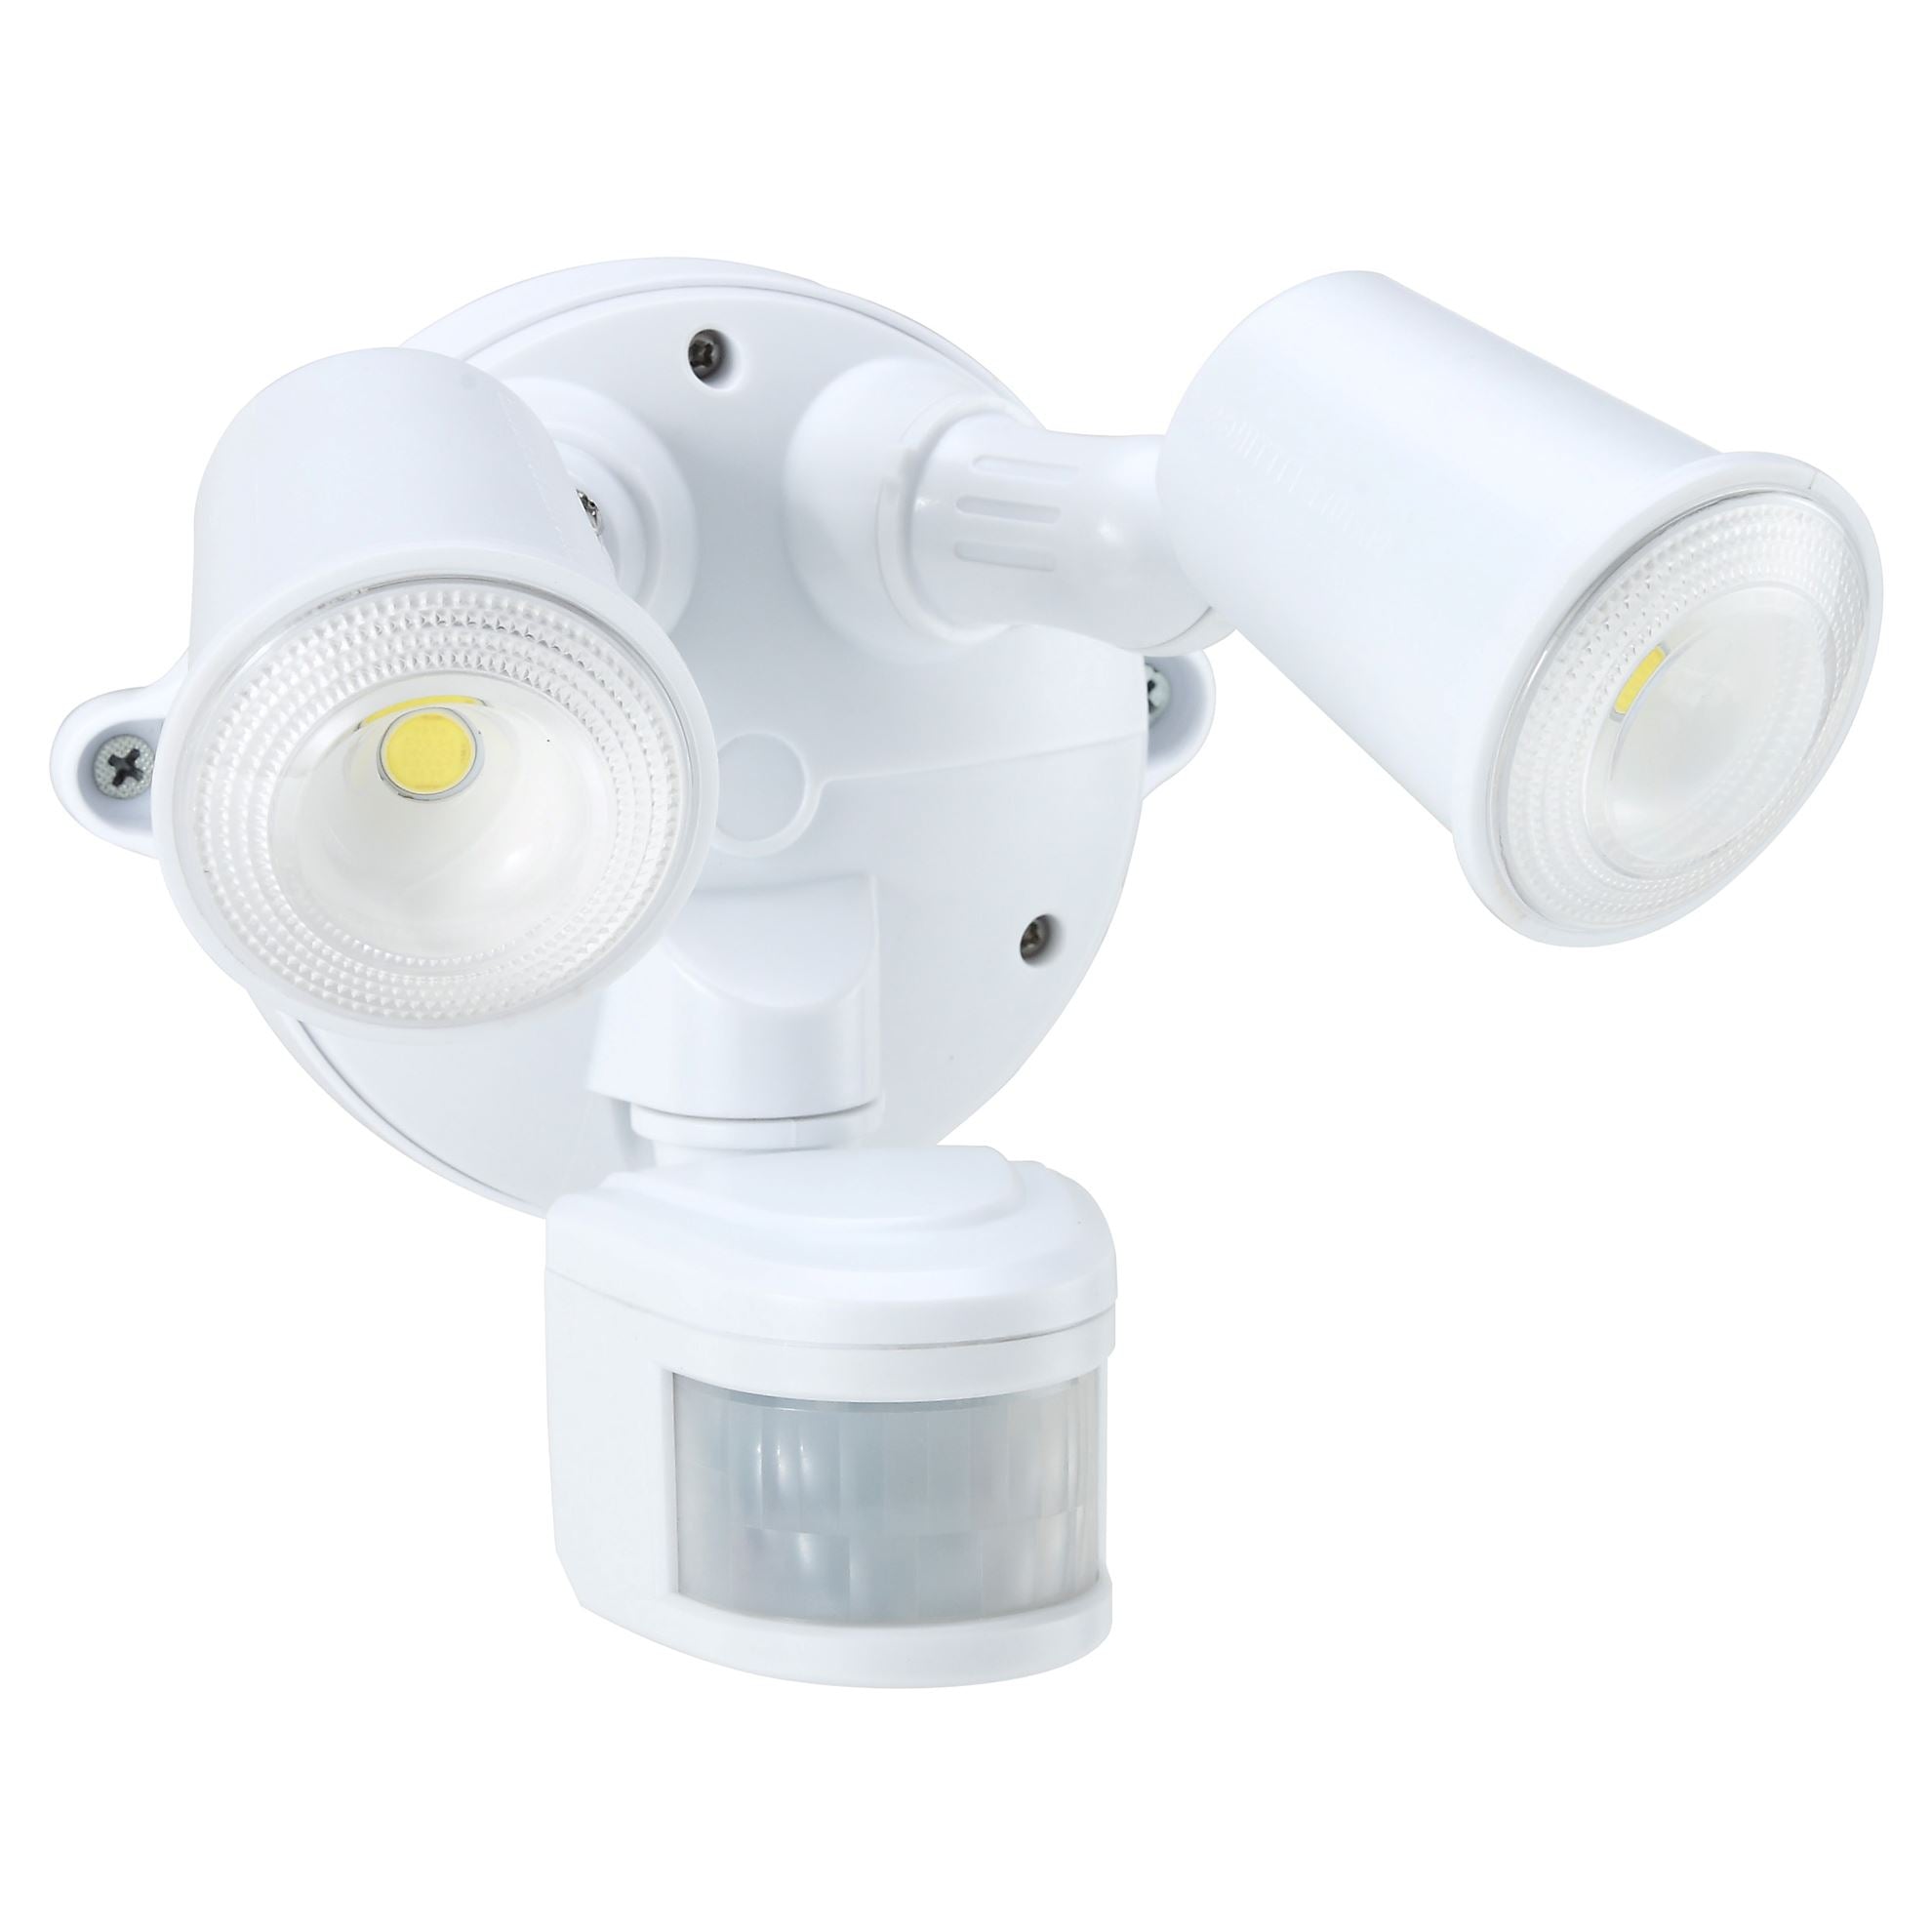 HOUSEWATCH_10W_Twin_LED_Spotlight_with_Motion_Sensor._IP54._Passive_IR._9m_(Side)_and_12m_(Front)_Detection_Range._Detection_Angle_140_Degree._Includes_Timing_&